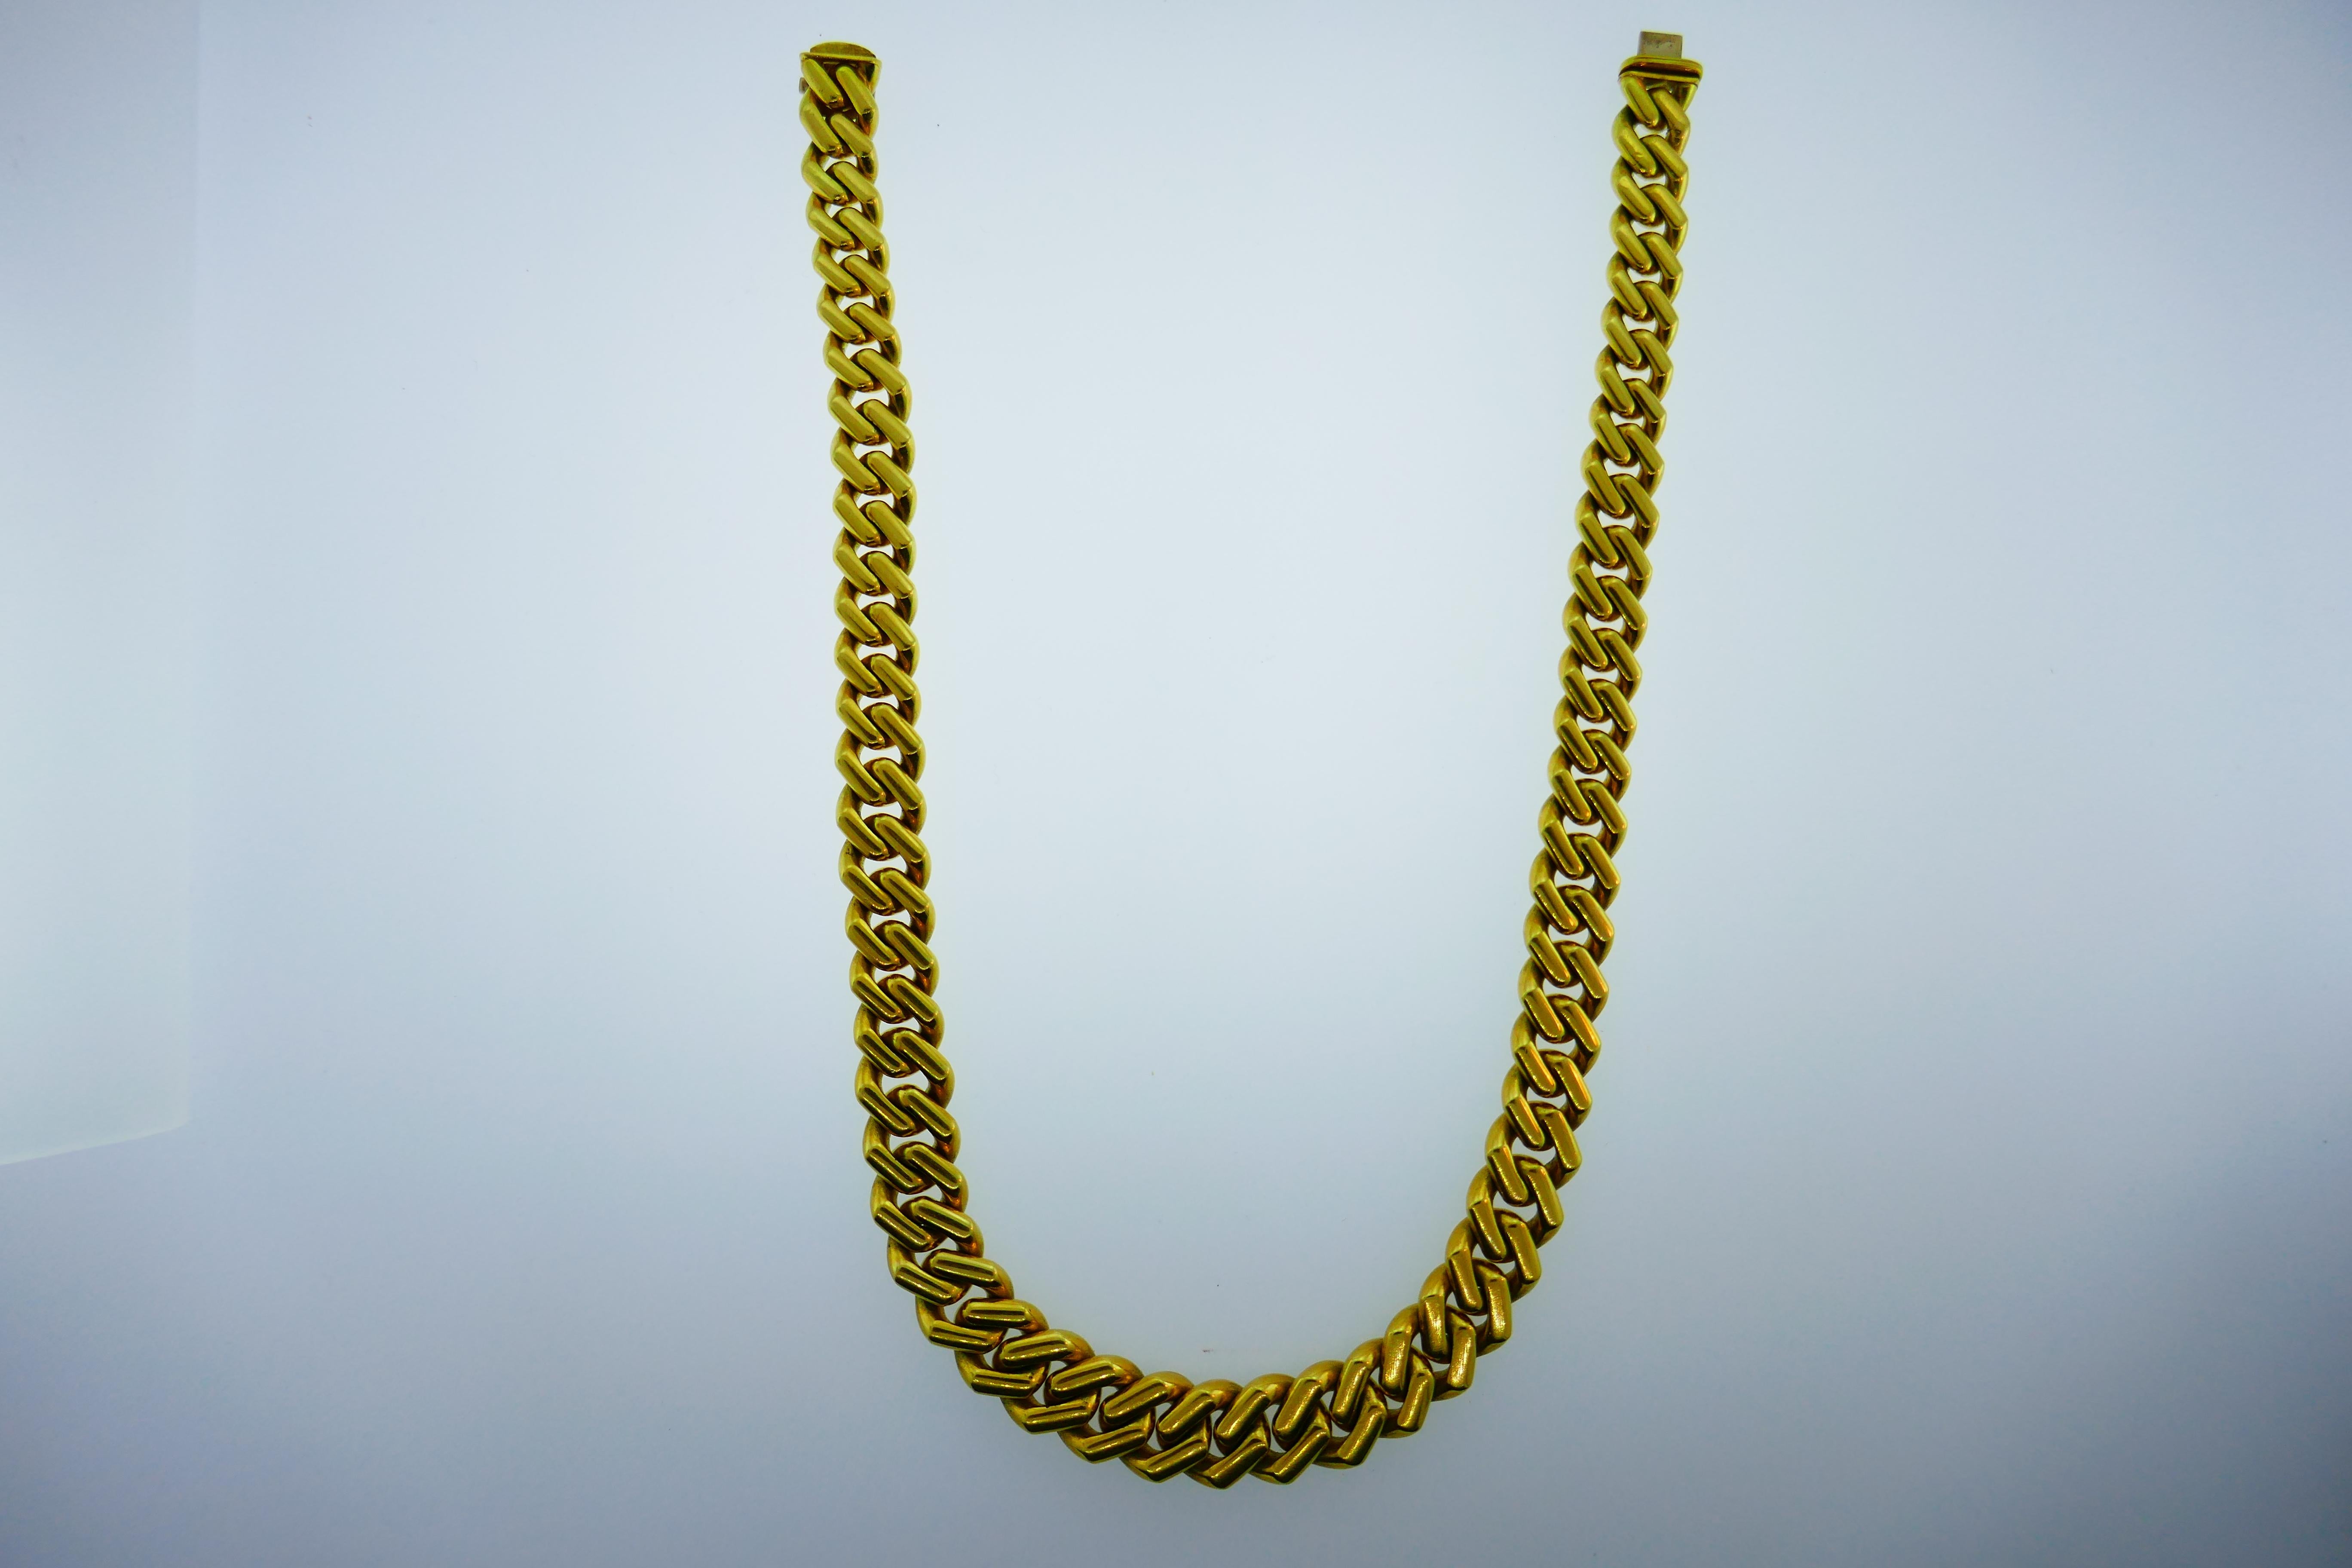 Here is your chance to purchase a beautiful and highly collectible designer necklace.  Truly a great piece at a great price! 

Weight: 175 grams 

Dimensions: 15.75